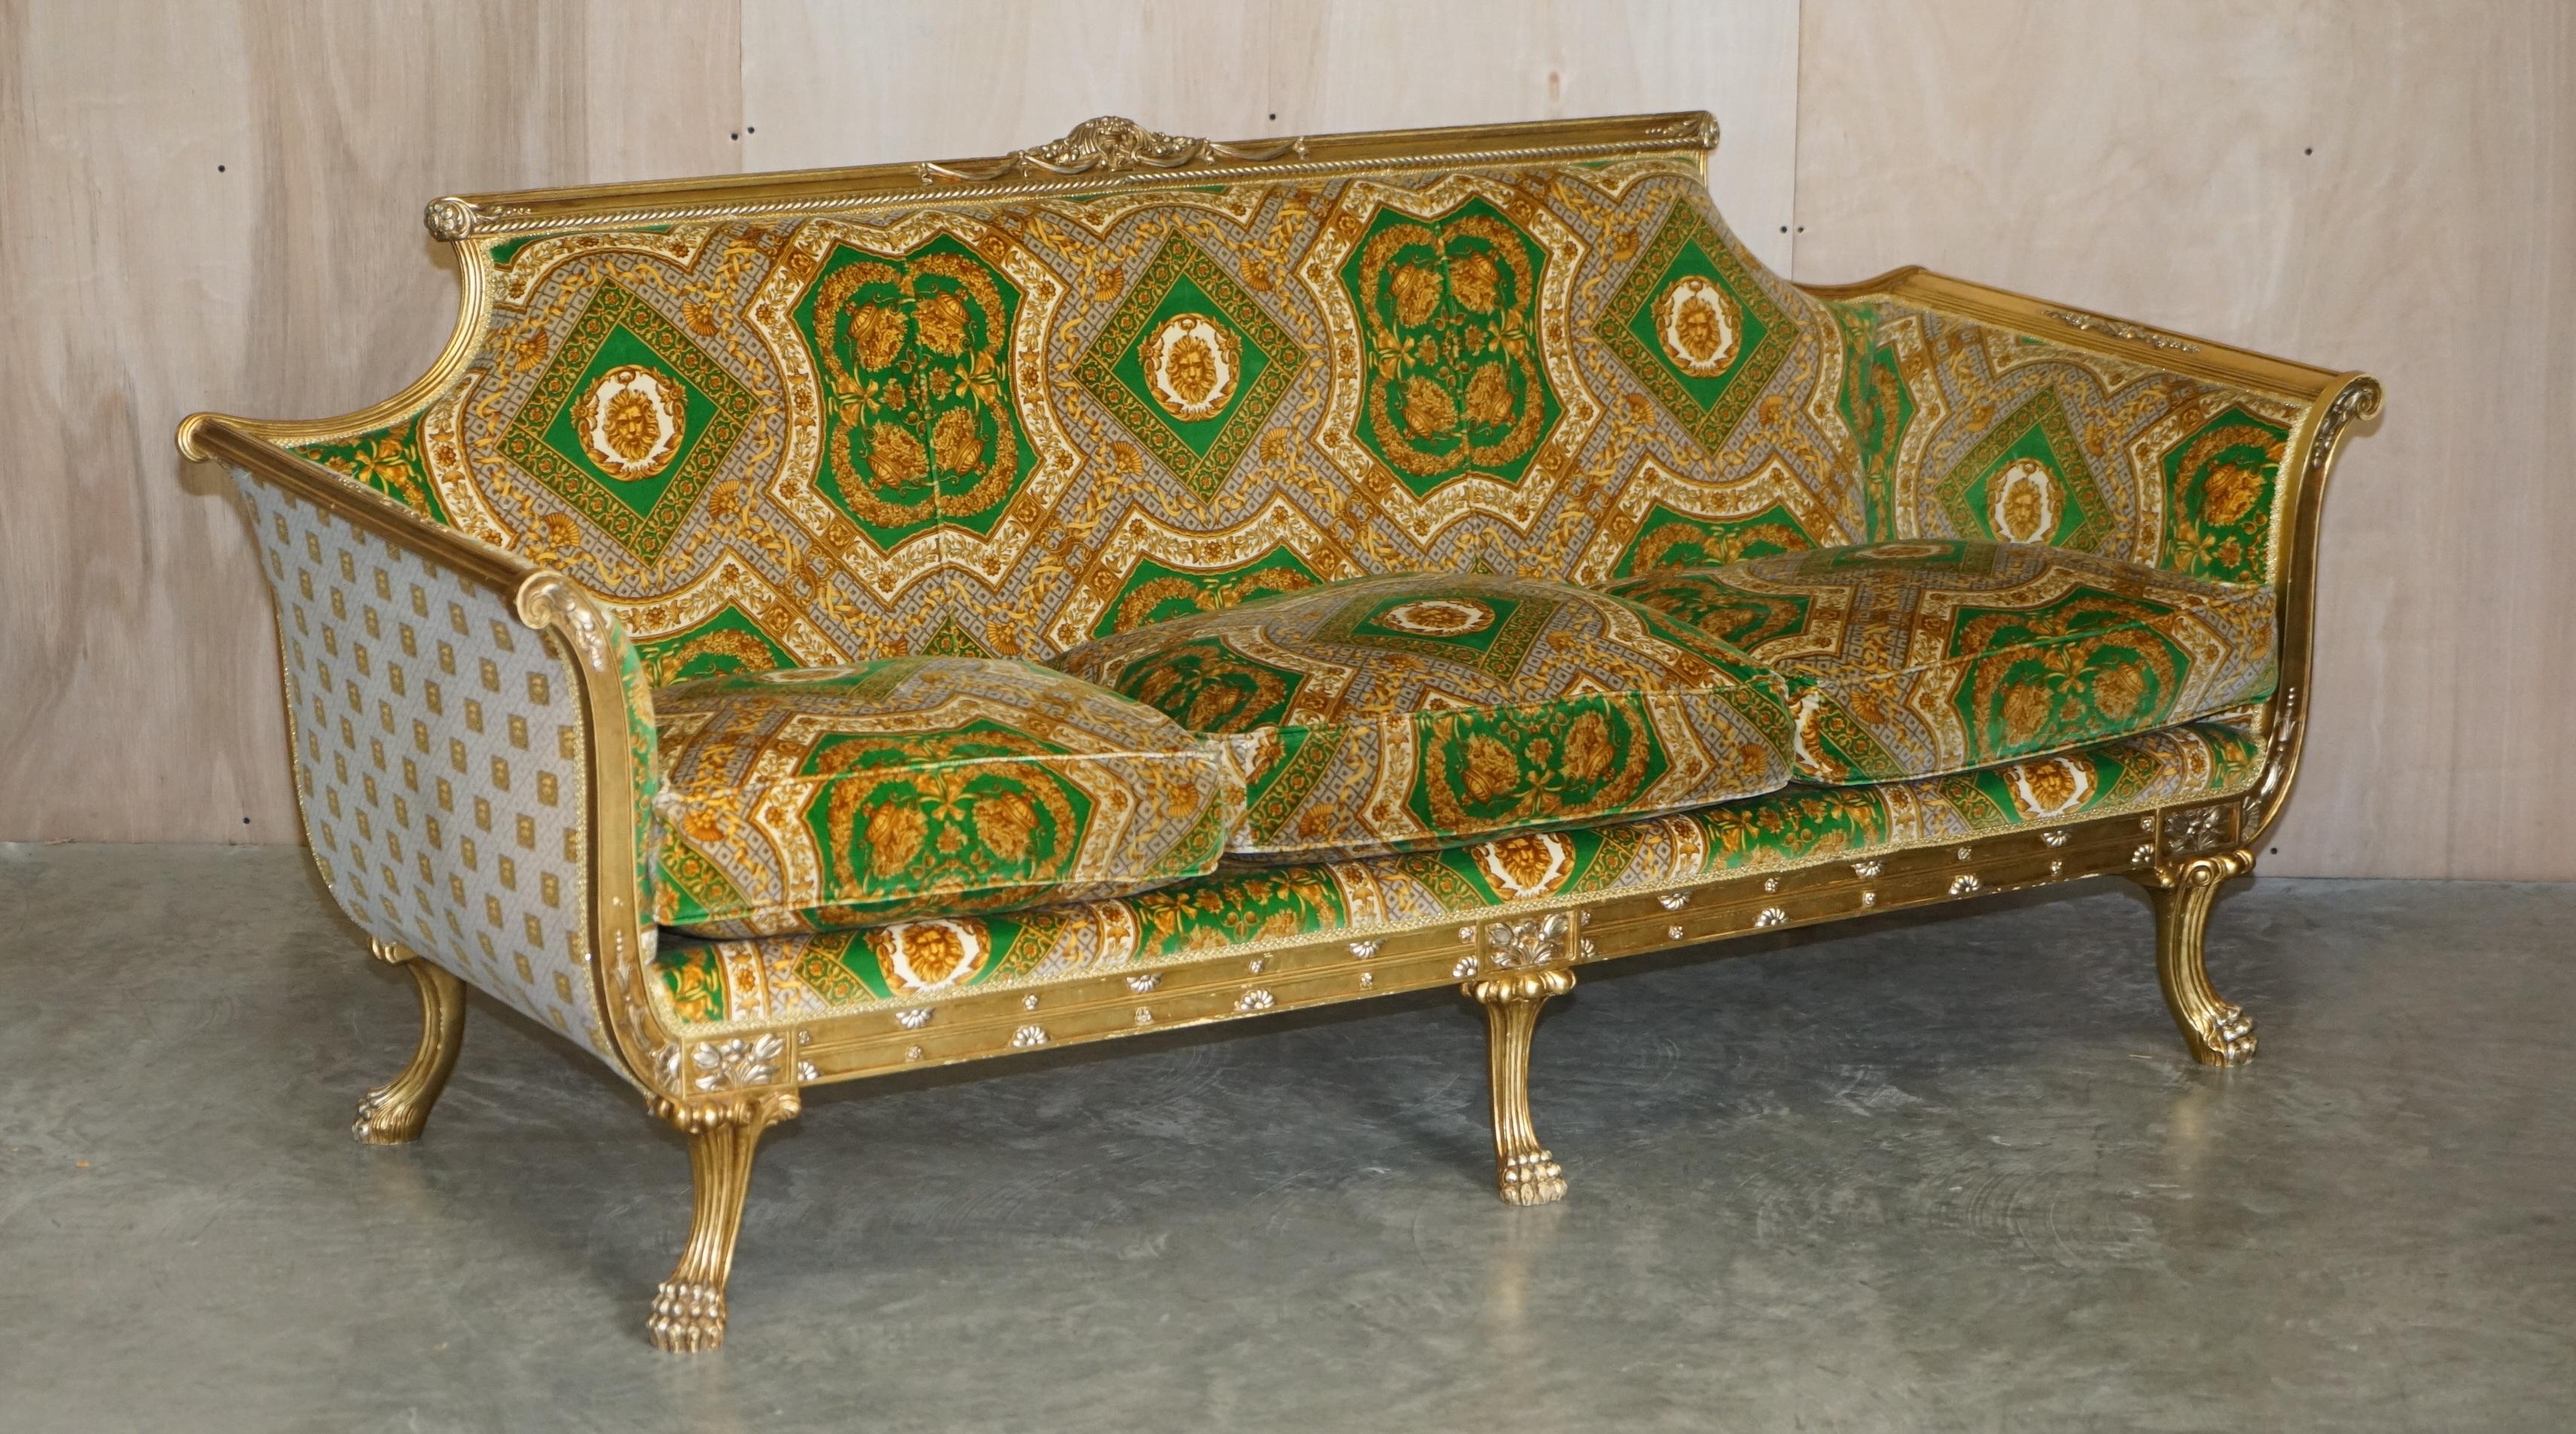 Versace Couch - 12 For Sale on 1stDibs | versace sofa price, versace couch  price, versace furniture